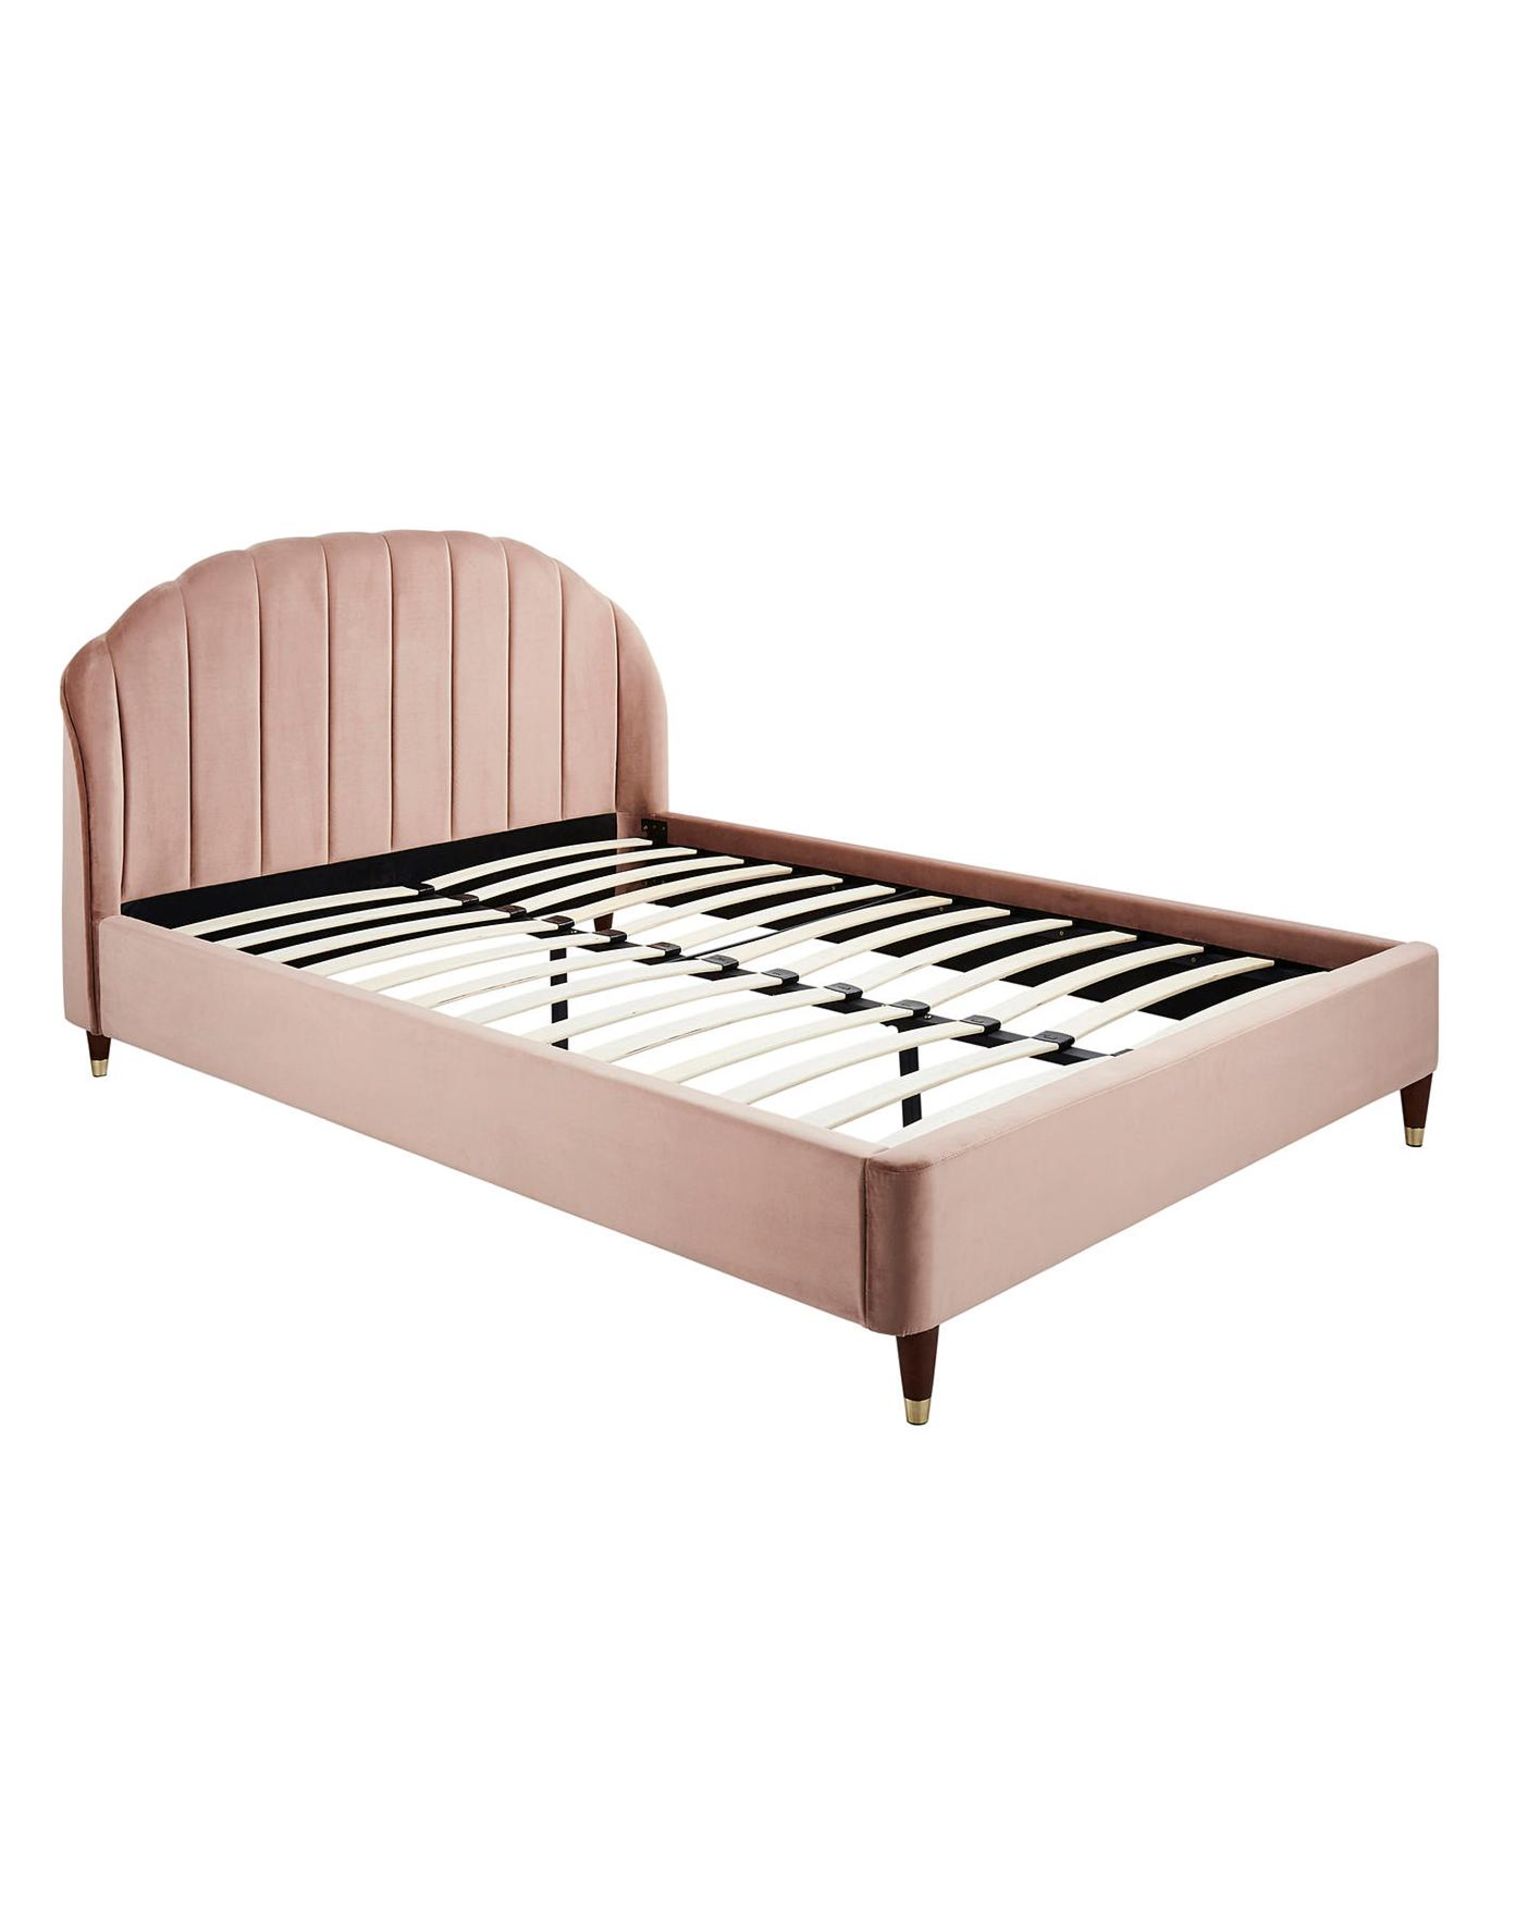 BRAND NEW CLARA Fabric DOUBLE Bed Frame. BLUSH. RRP £419 EACH. The Clara fabric bed frame features a - Image 2 of 2